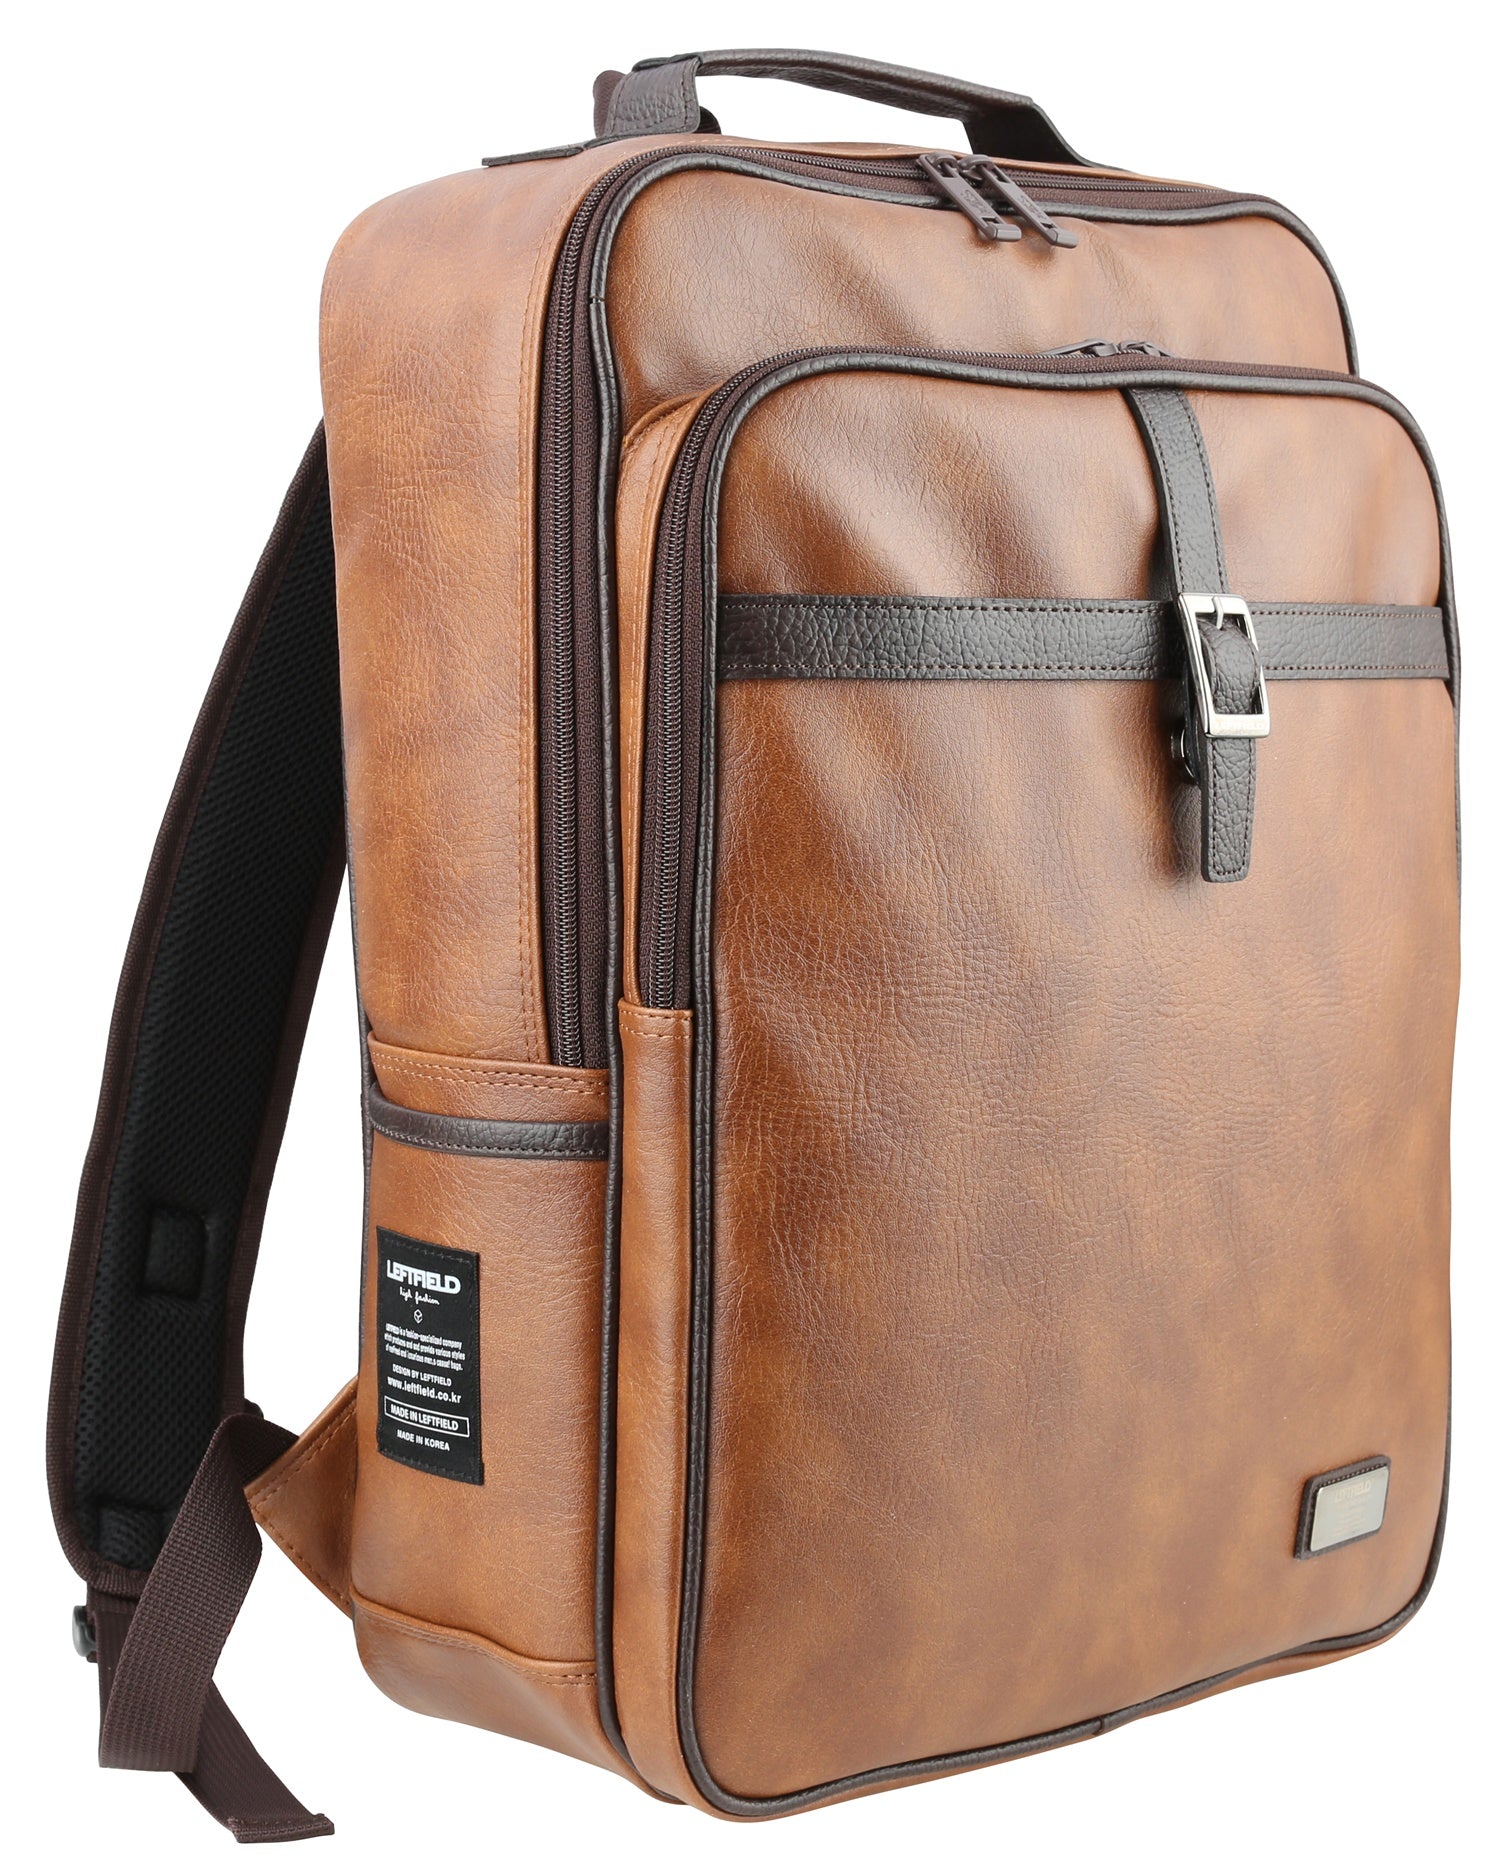 Tan Vintage Faux Leather Casual Daypacks Backpacks